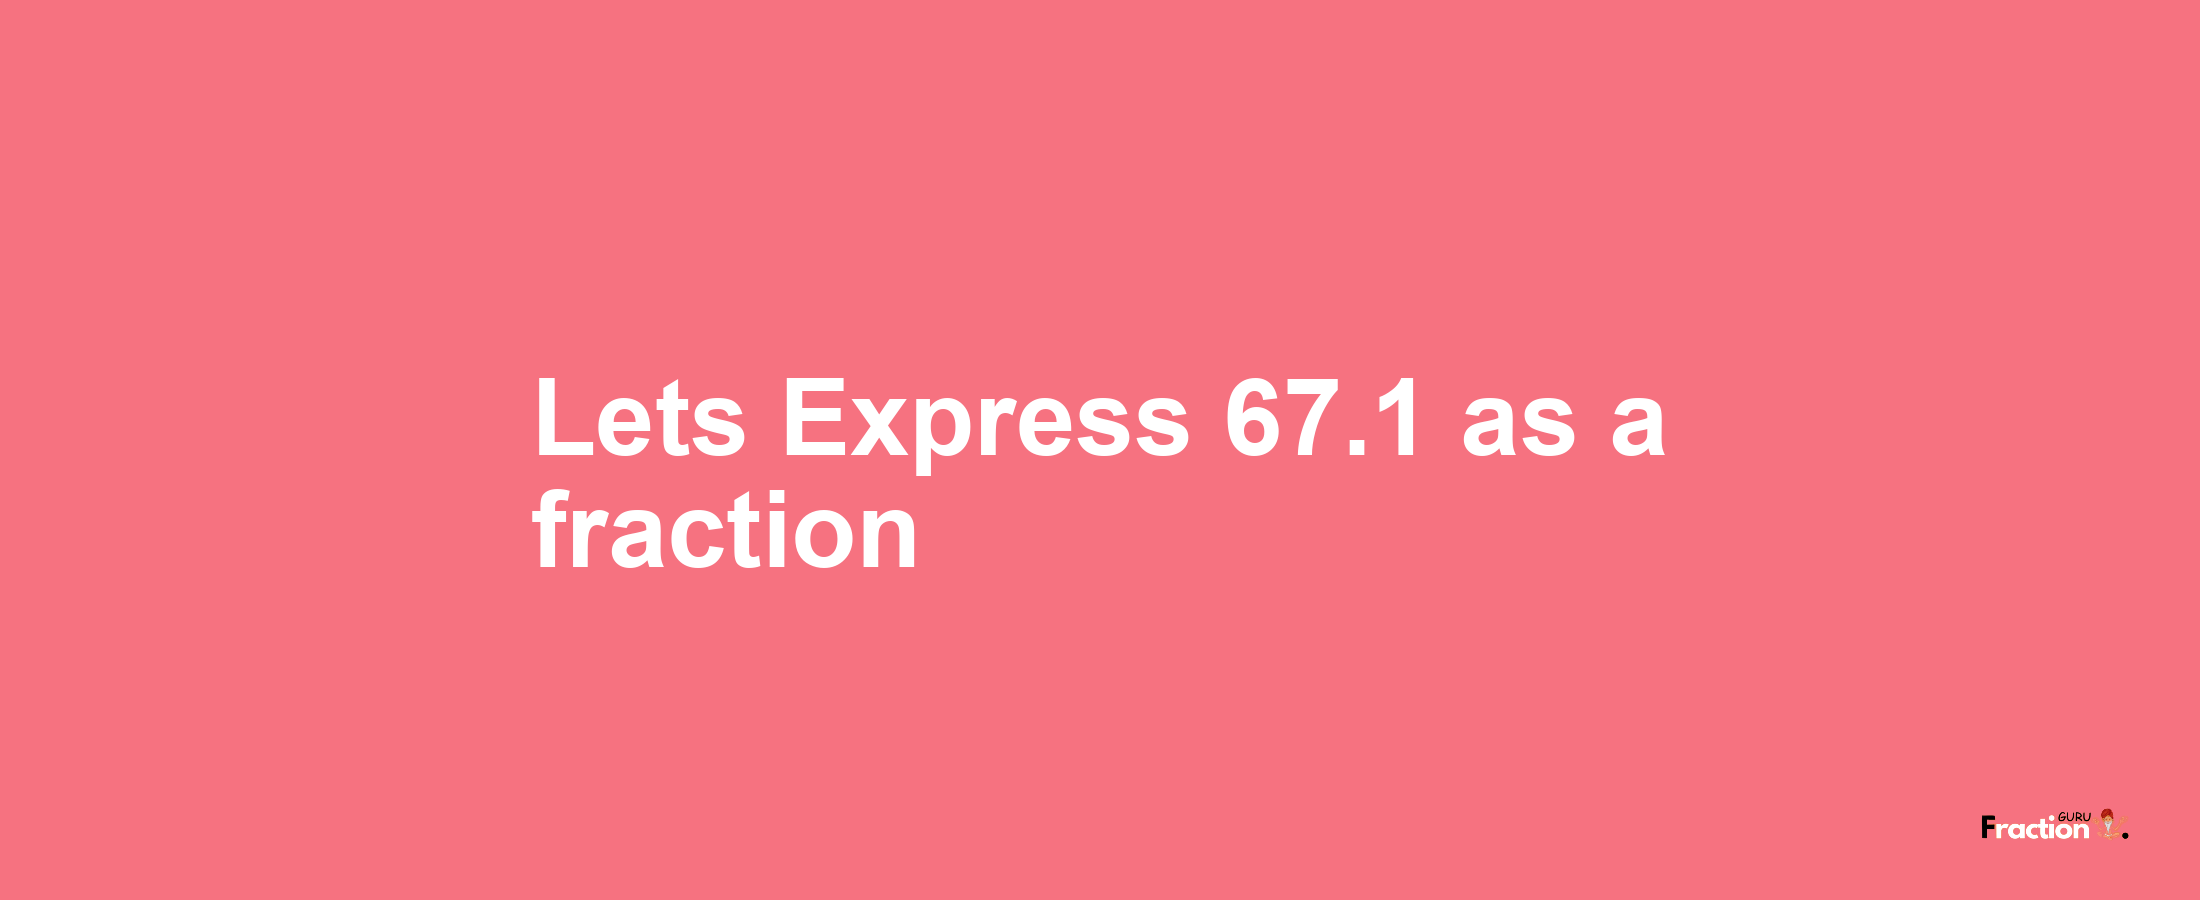 Lets Express 67.1 as afraction